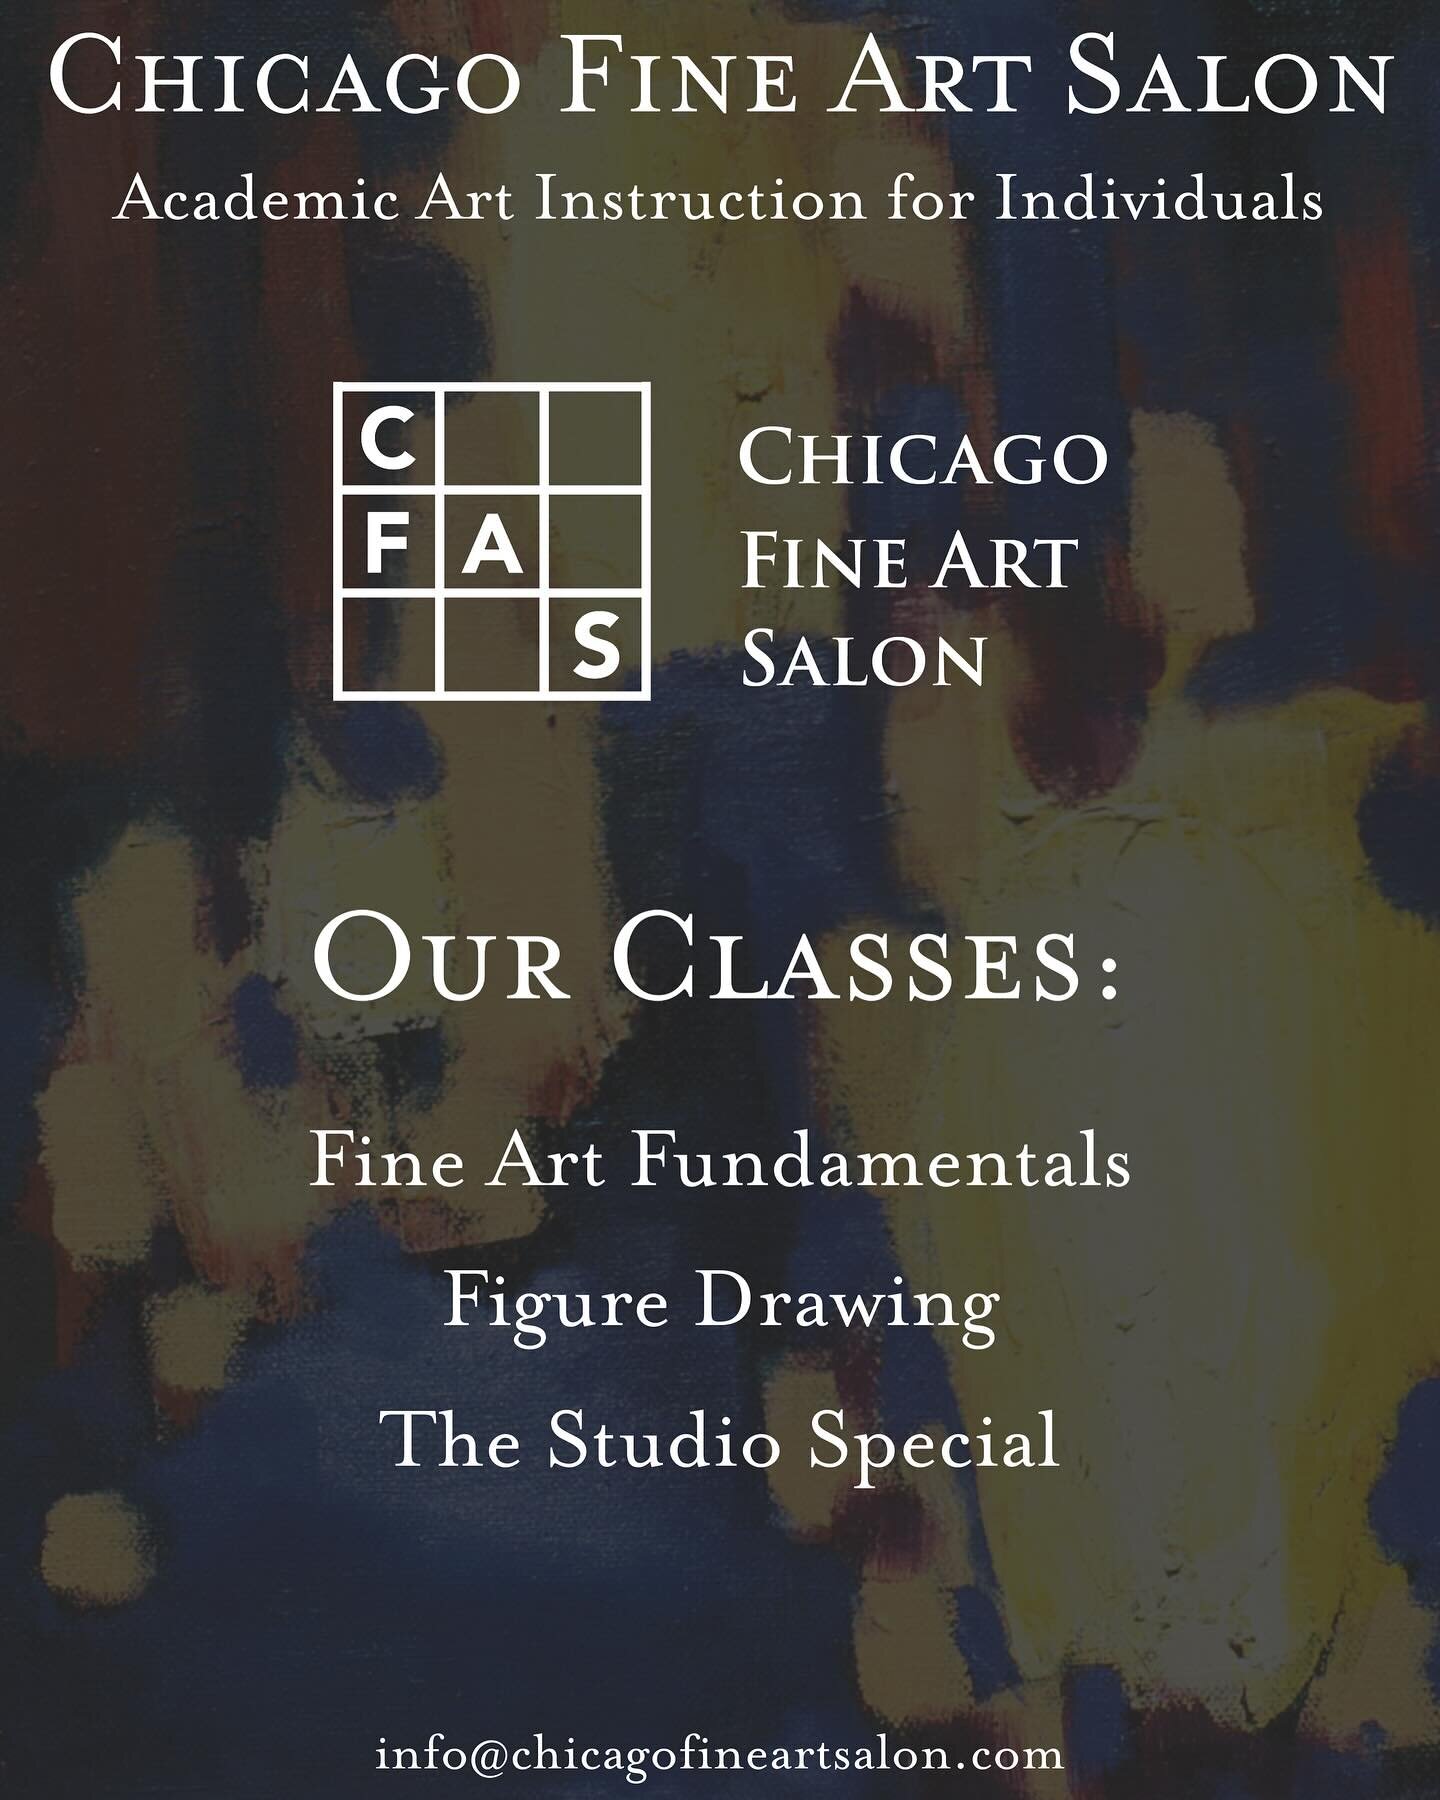 CFAS offers a variety of classes and services, including Figure Drawing with personalized instruction! 

Whether you&rsquo;re a beginner or experienced artist, CFAS offers instruction that caters to your pace and preferences. Sign up through the link